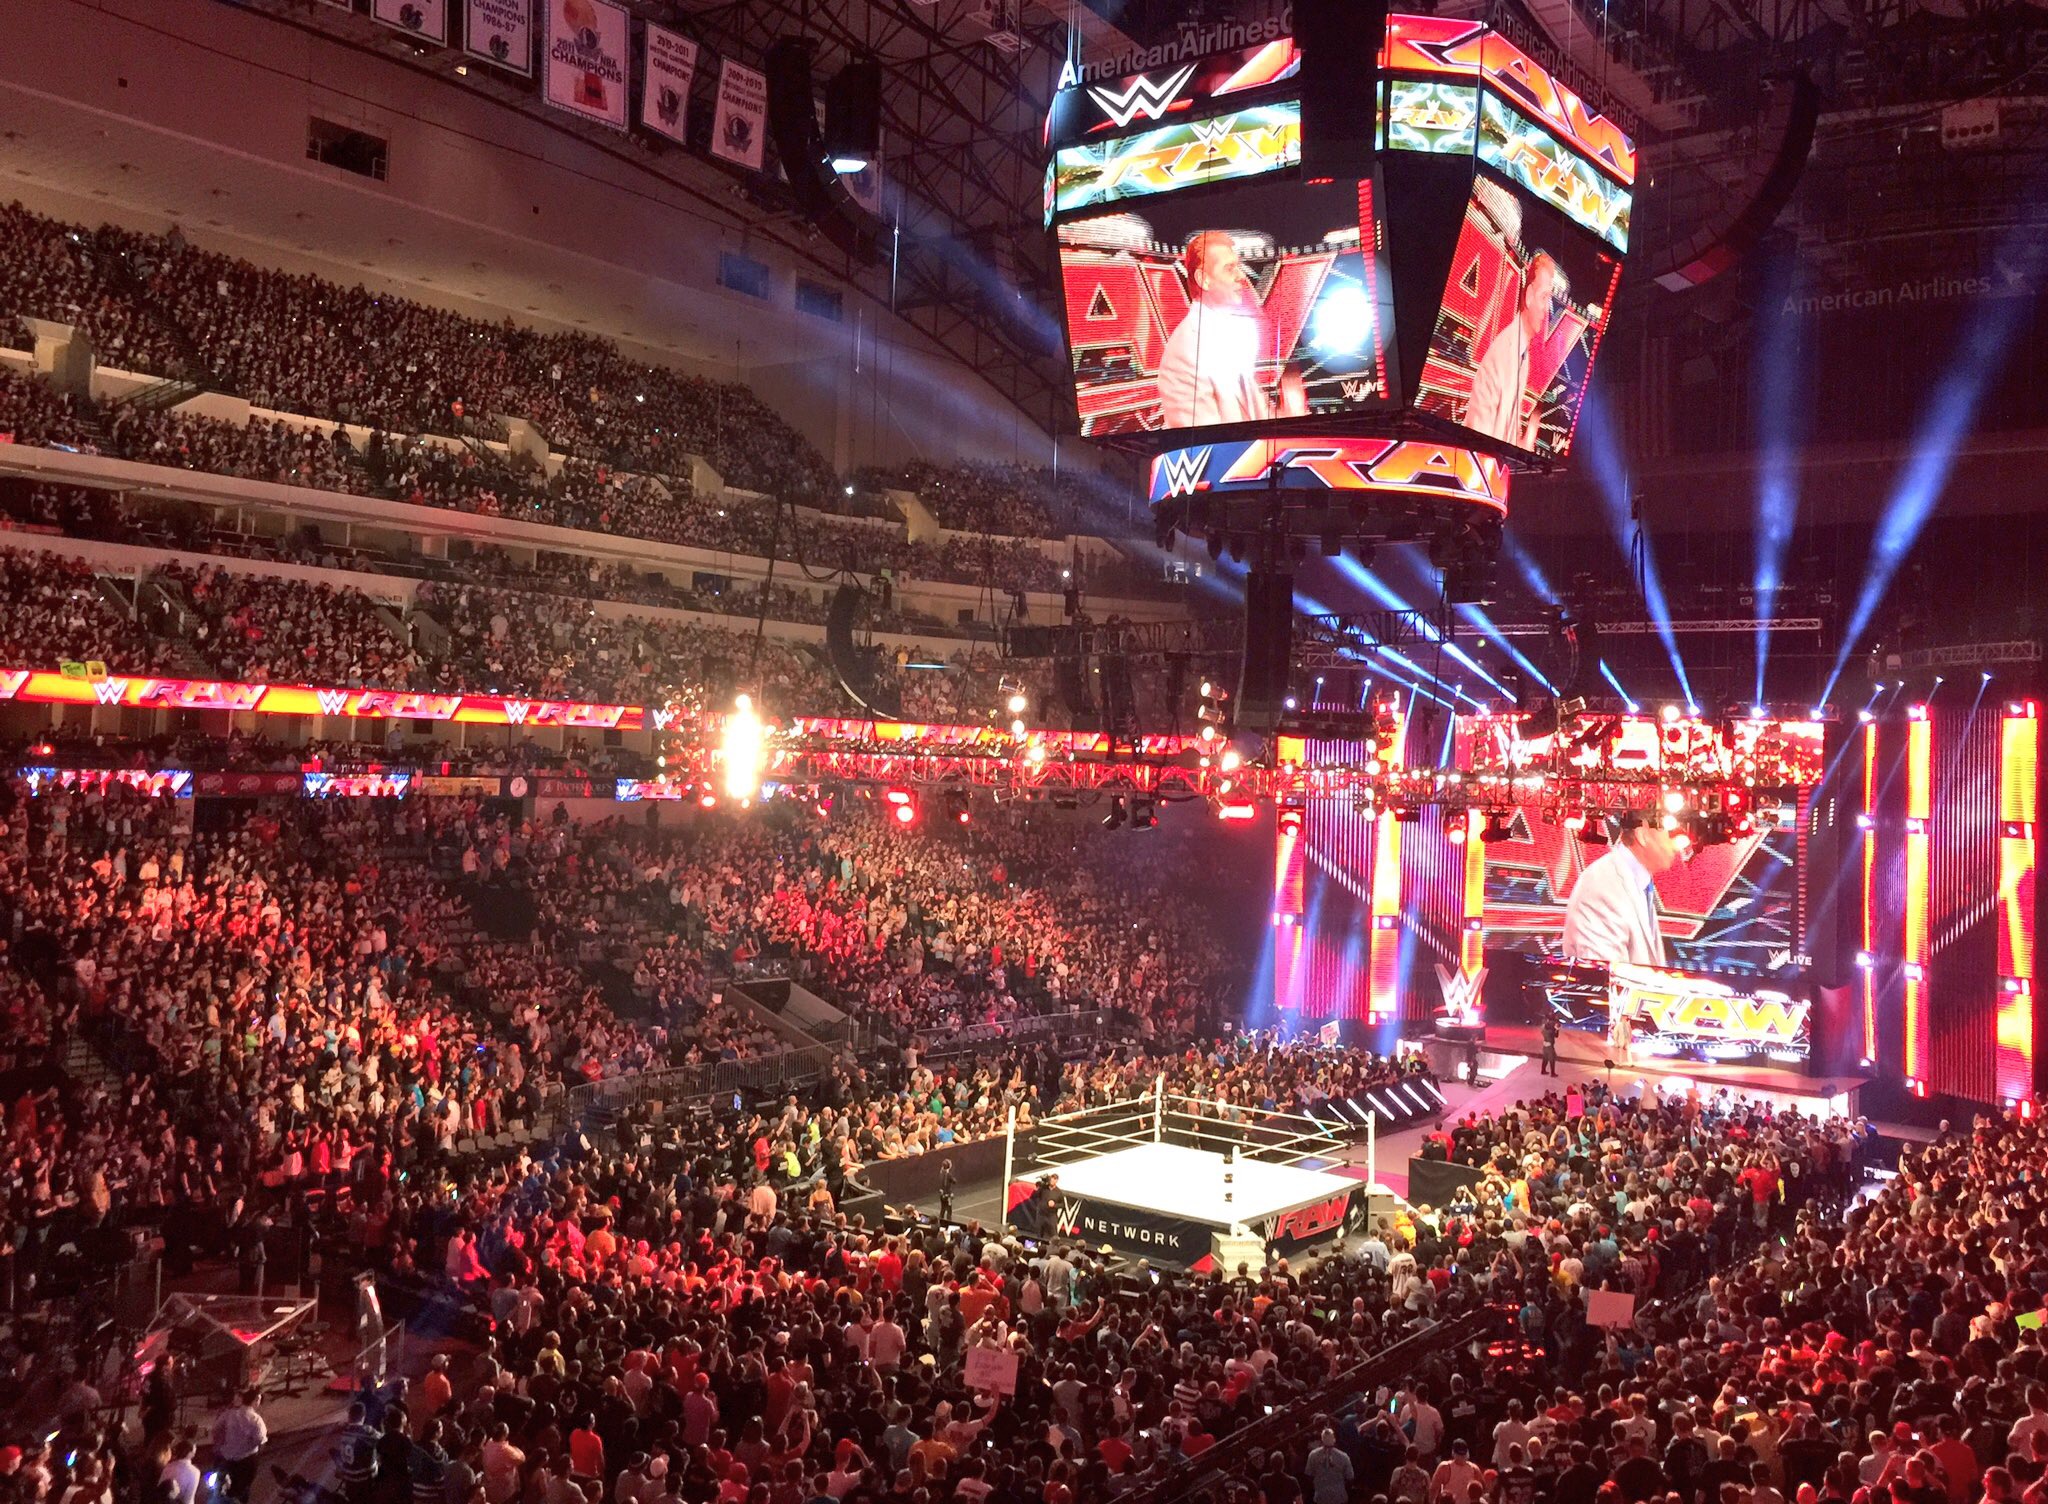 PHOTOS: The Monday Night War Podcast Channel is LIVE from Monday